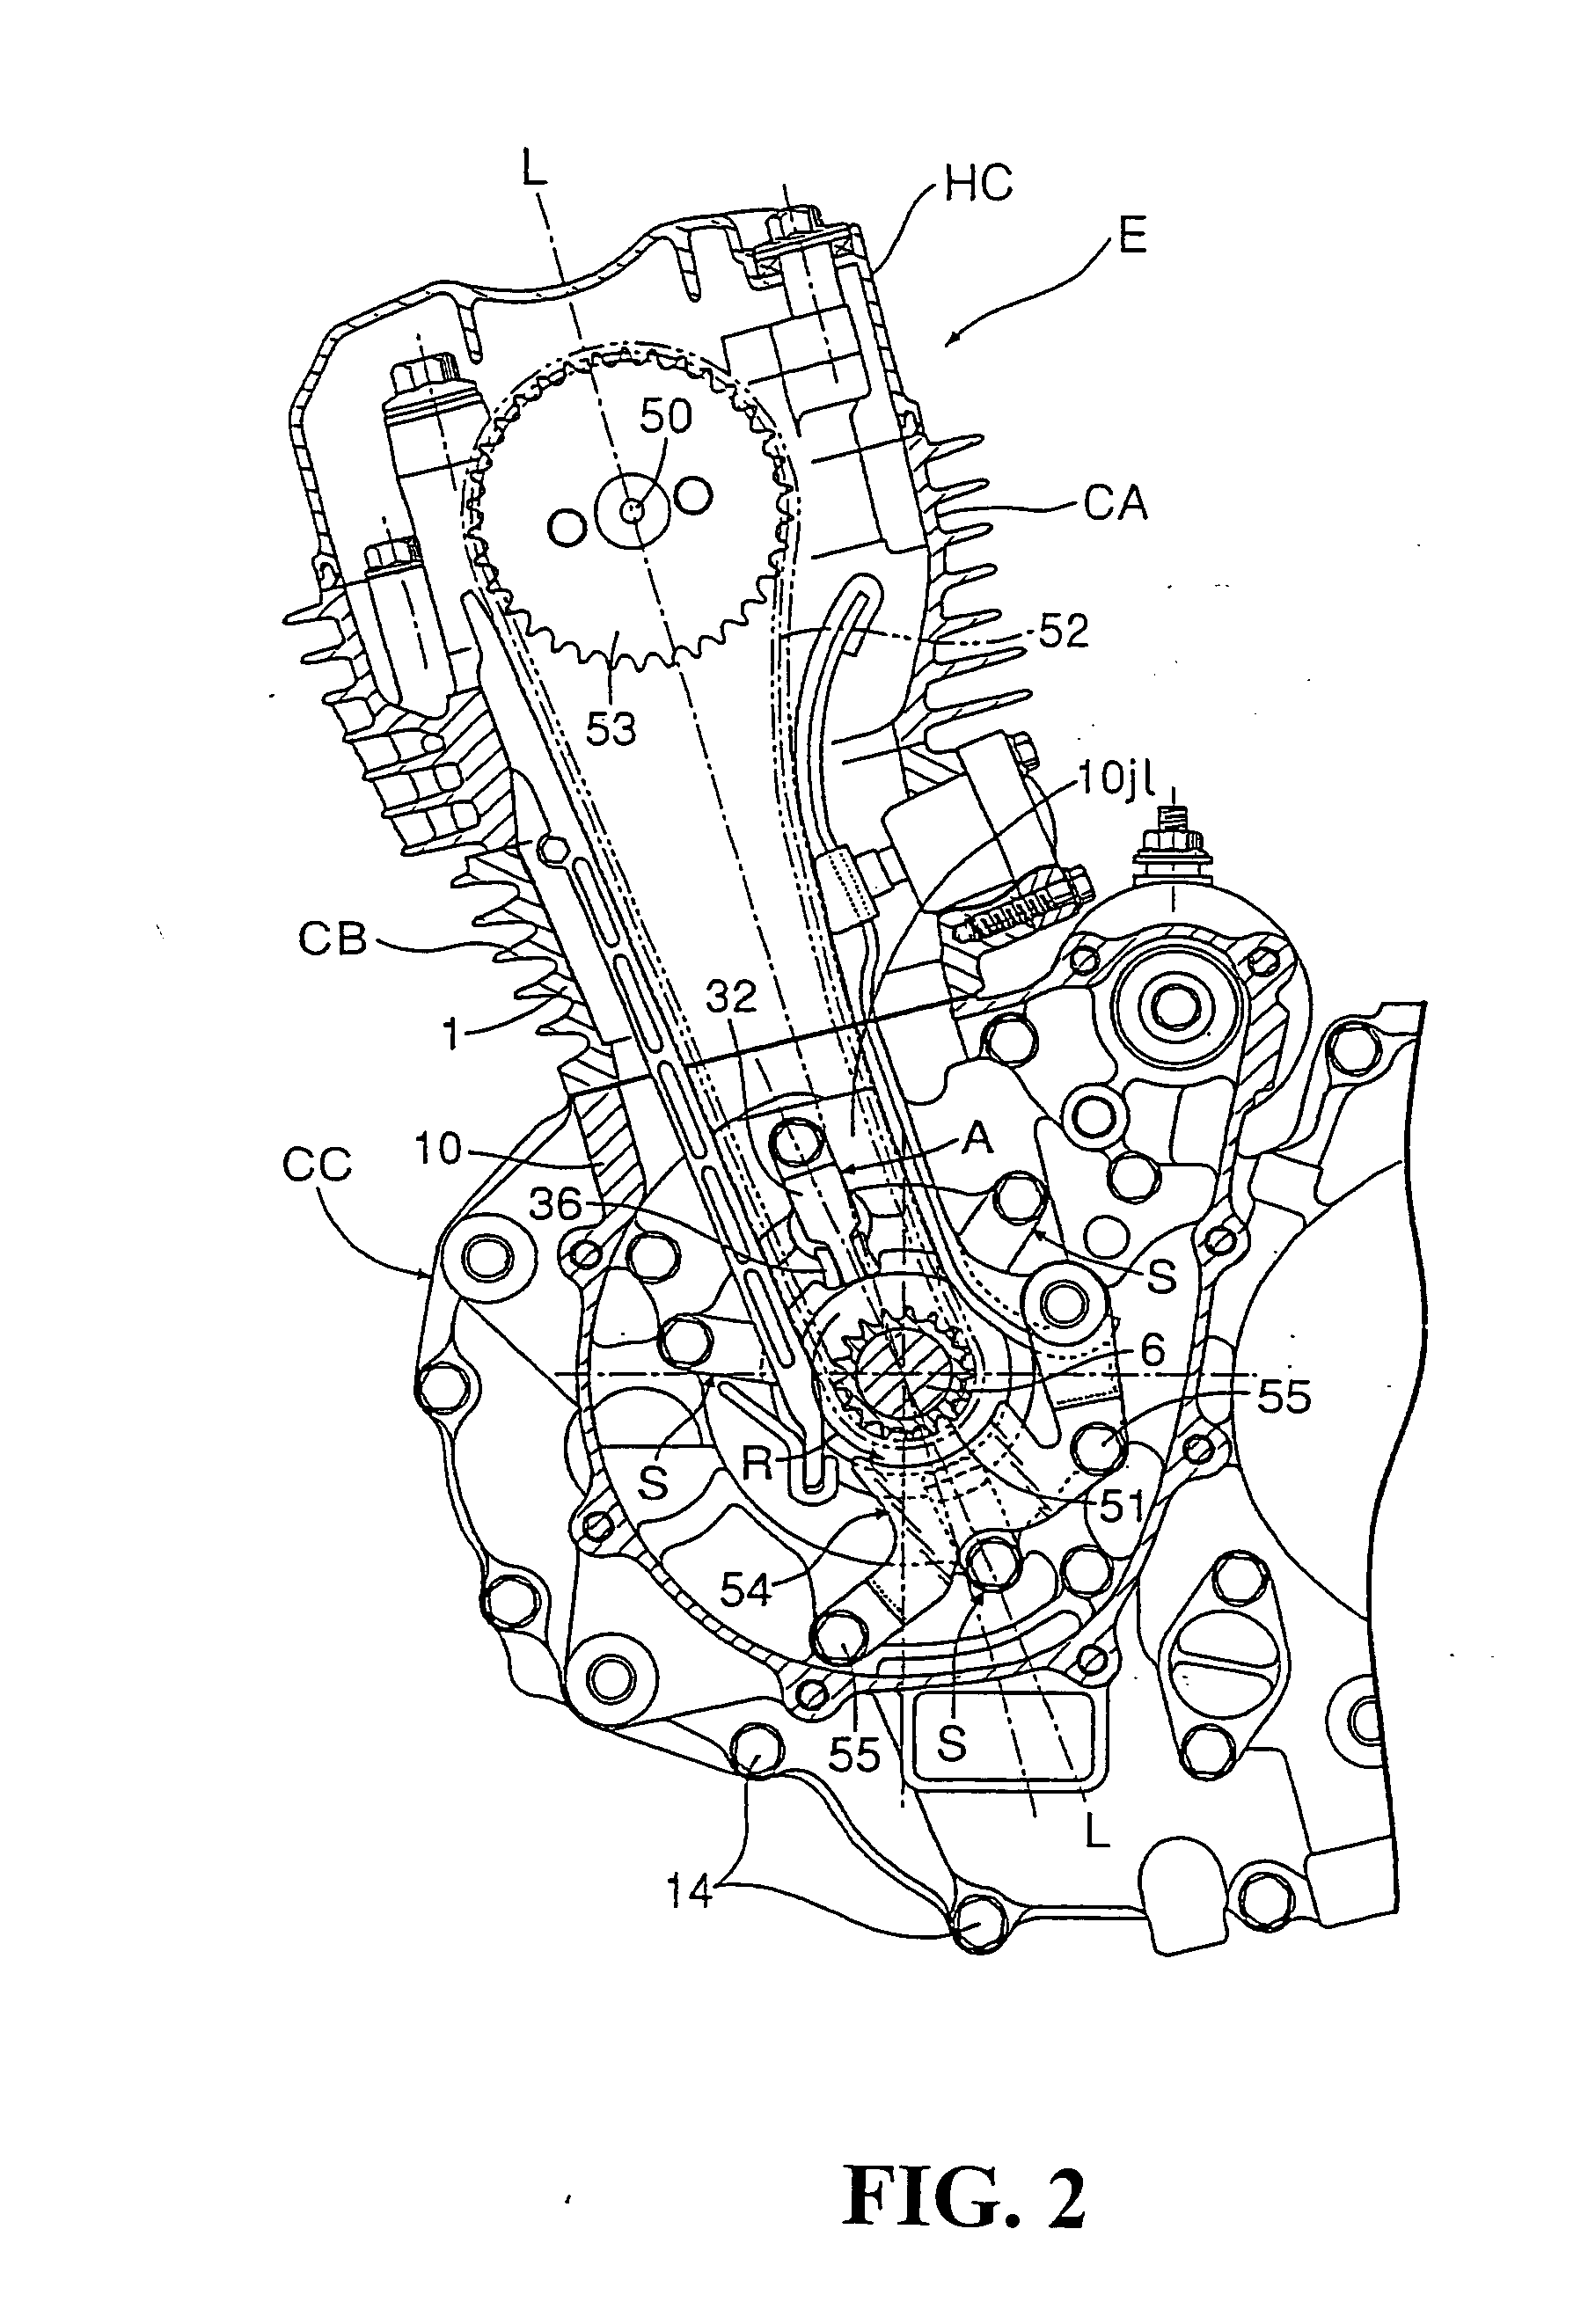 Bearing structure of crankshaft in internal combustion engine